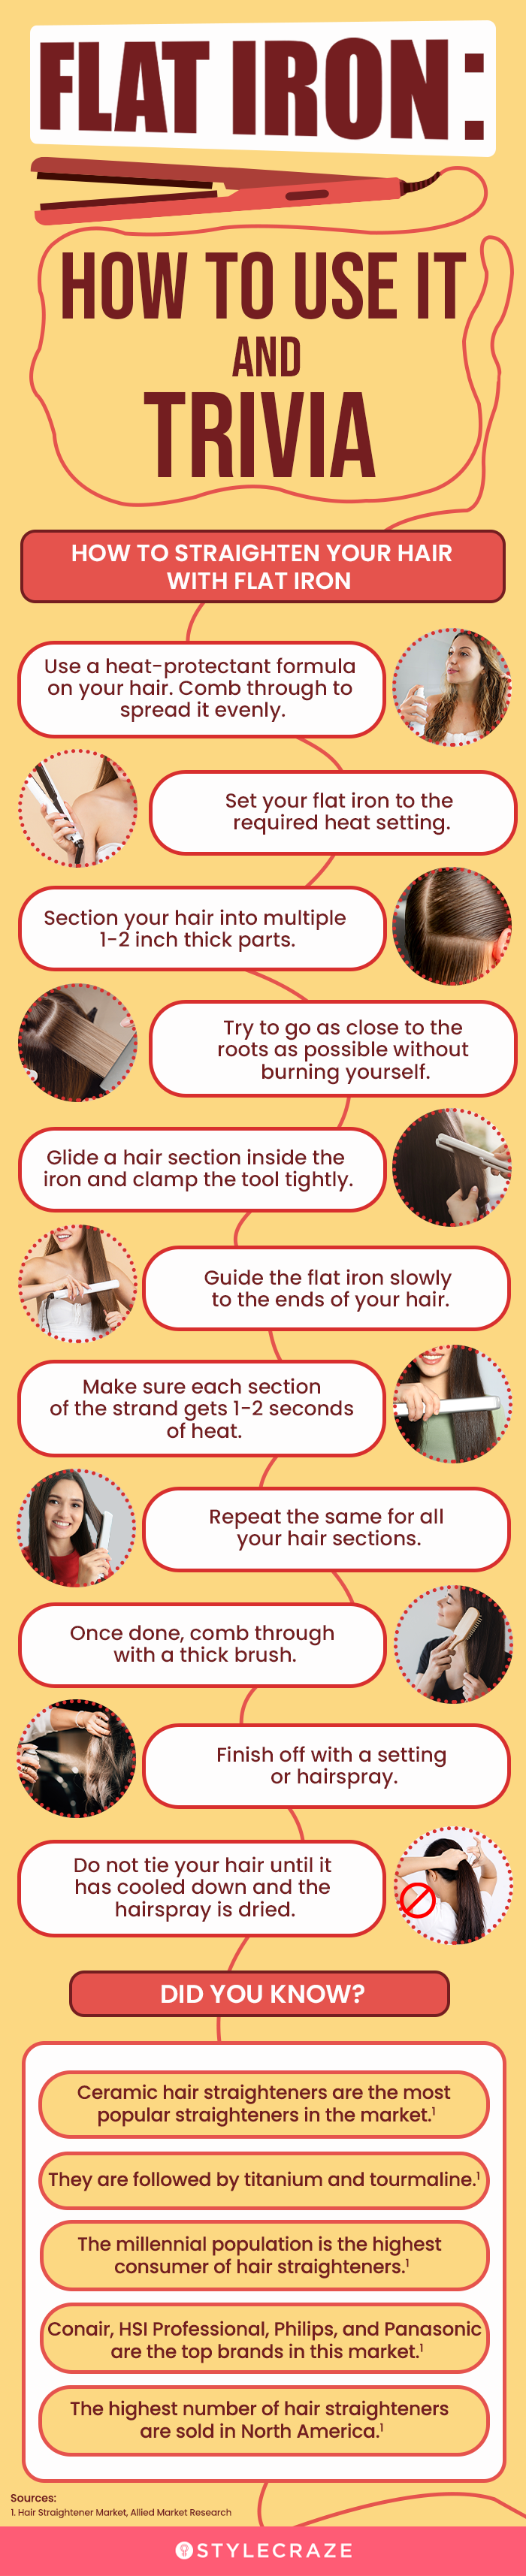 Flat Iron: How To Use It And Trivia Facts [infographic]